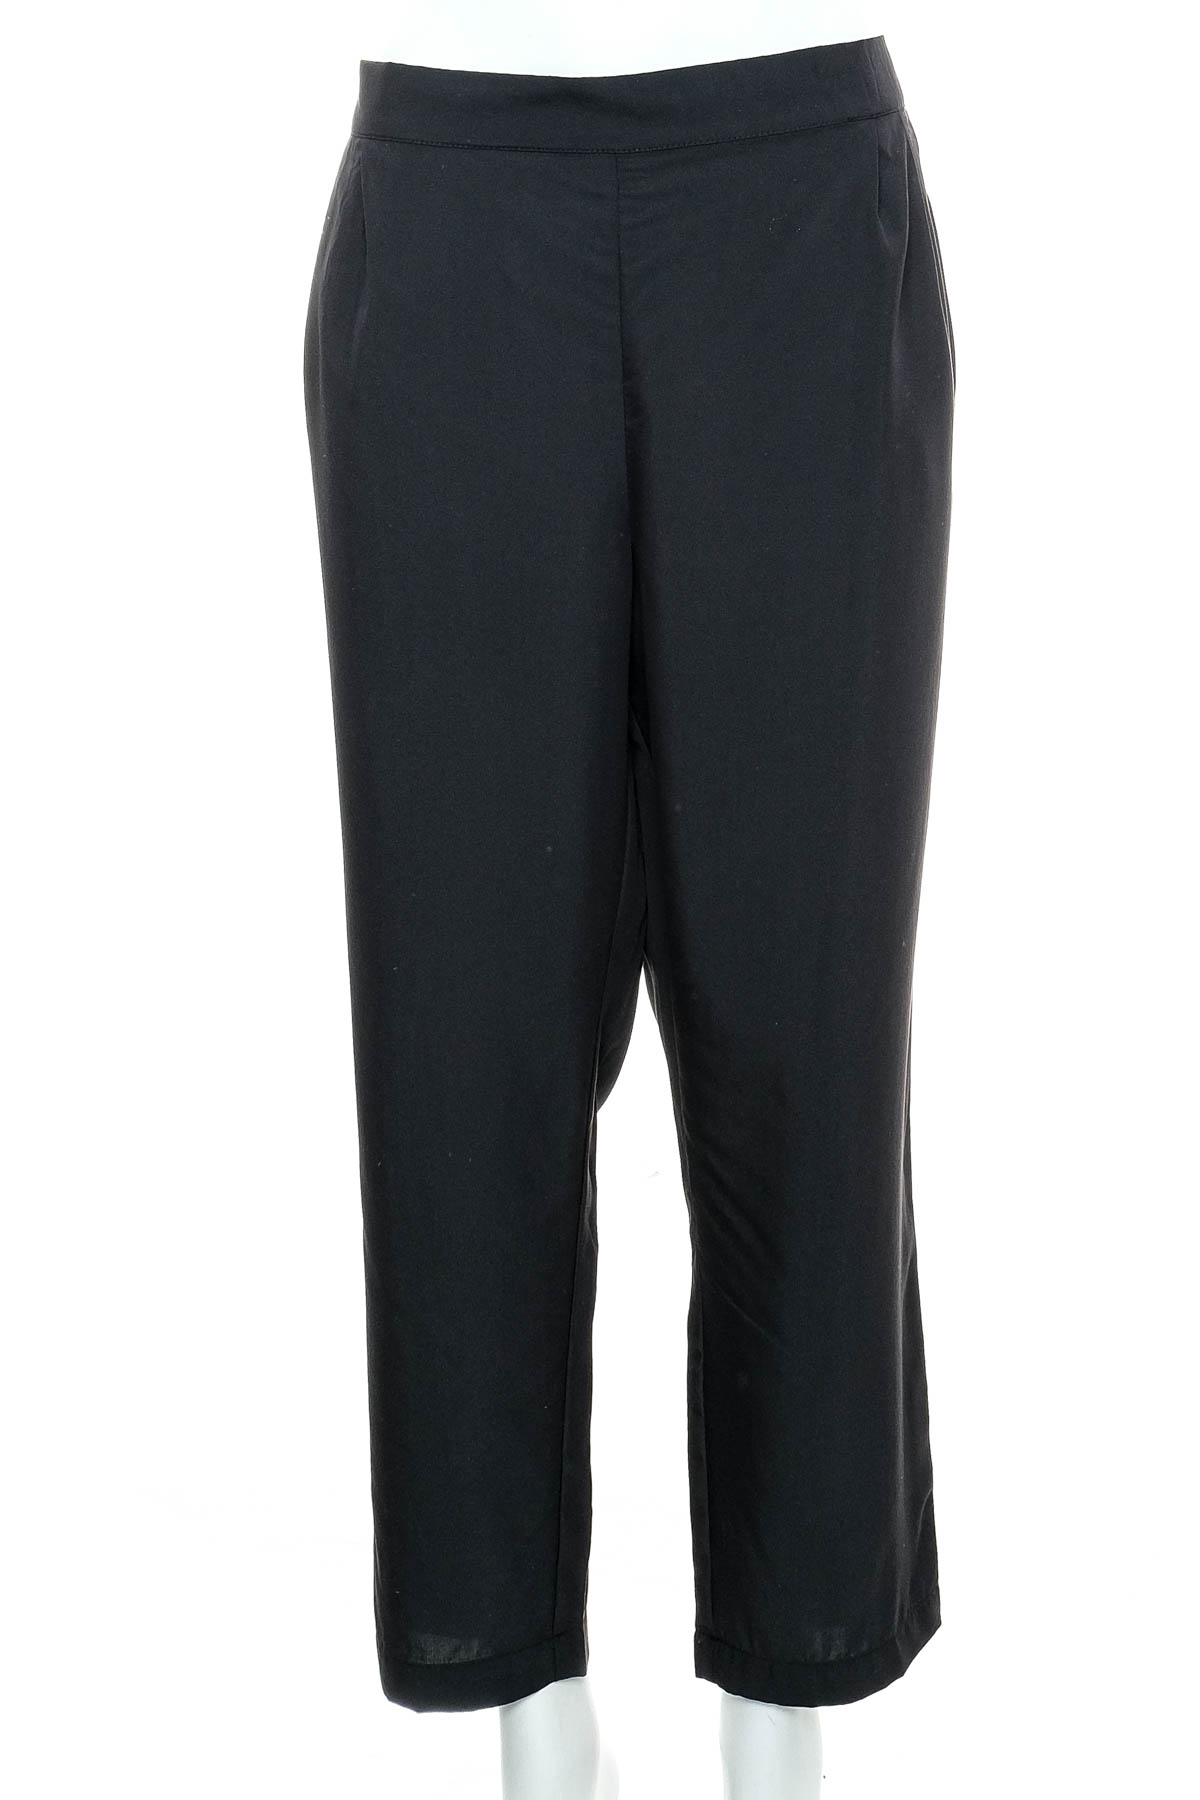 Women's trousers - WOMEN essentials by Tchibo - 0